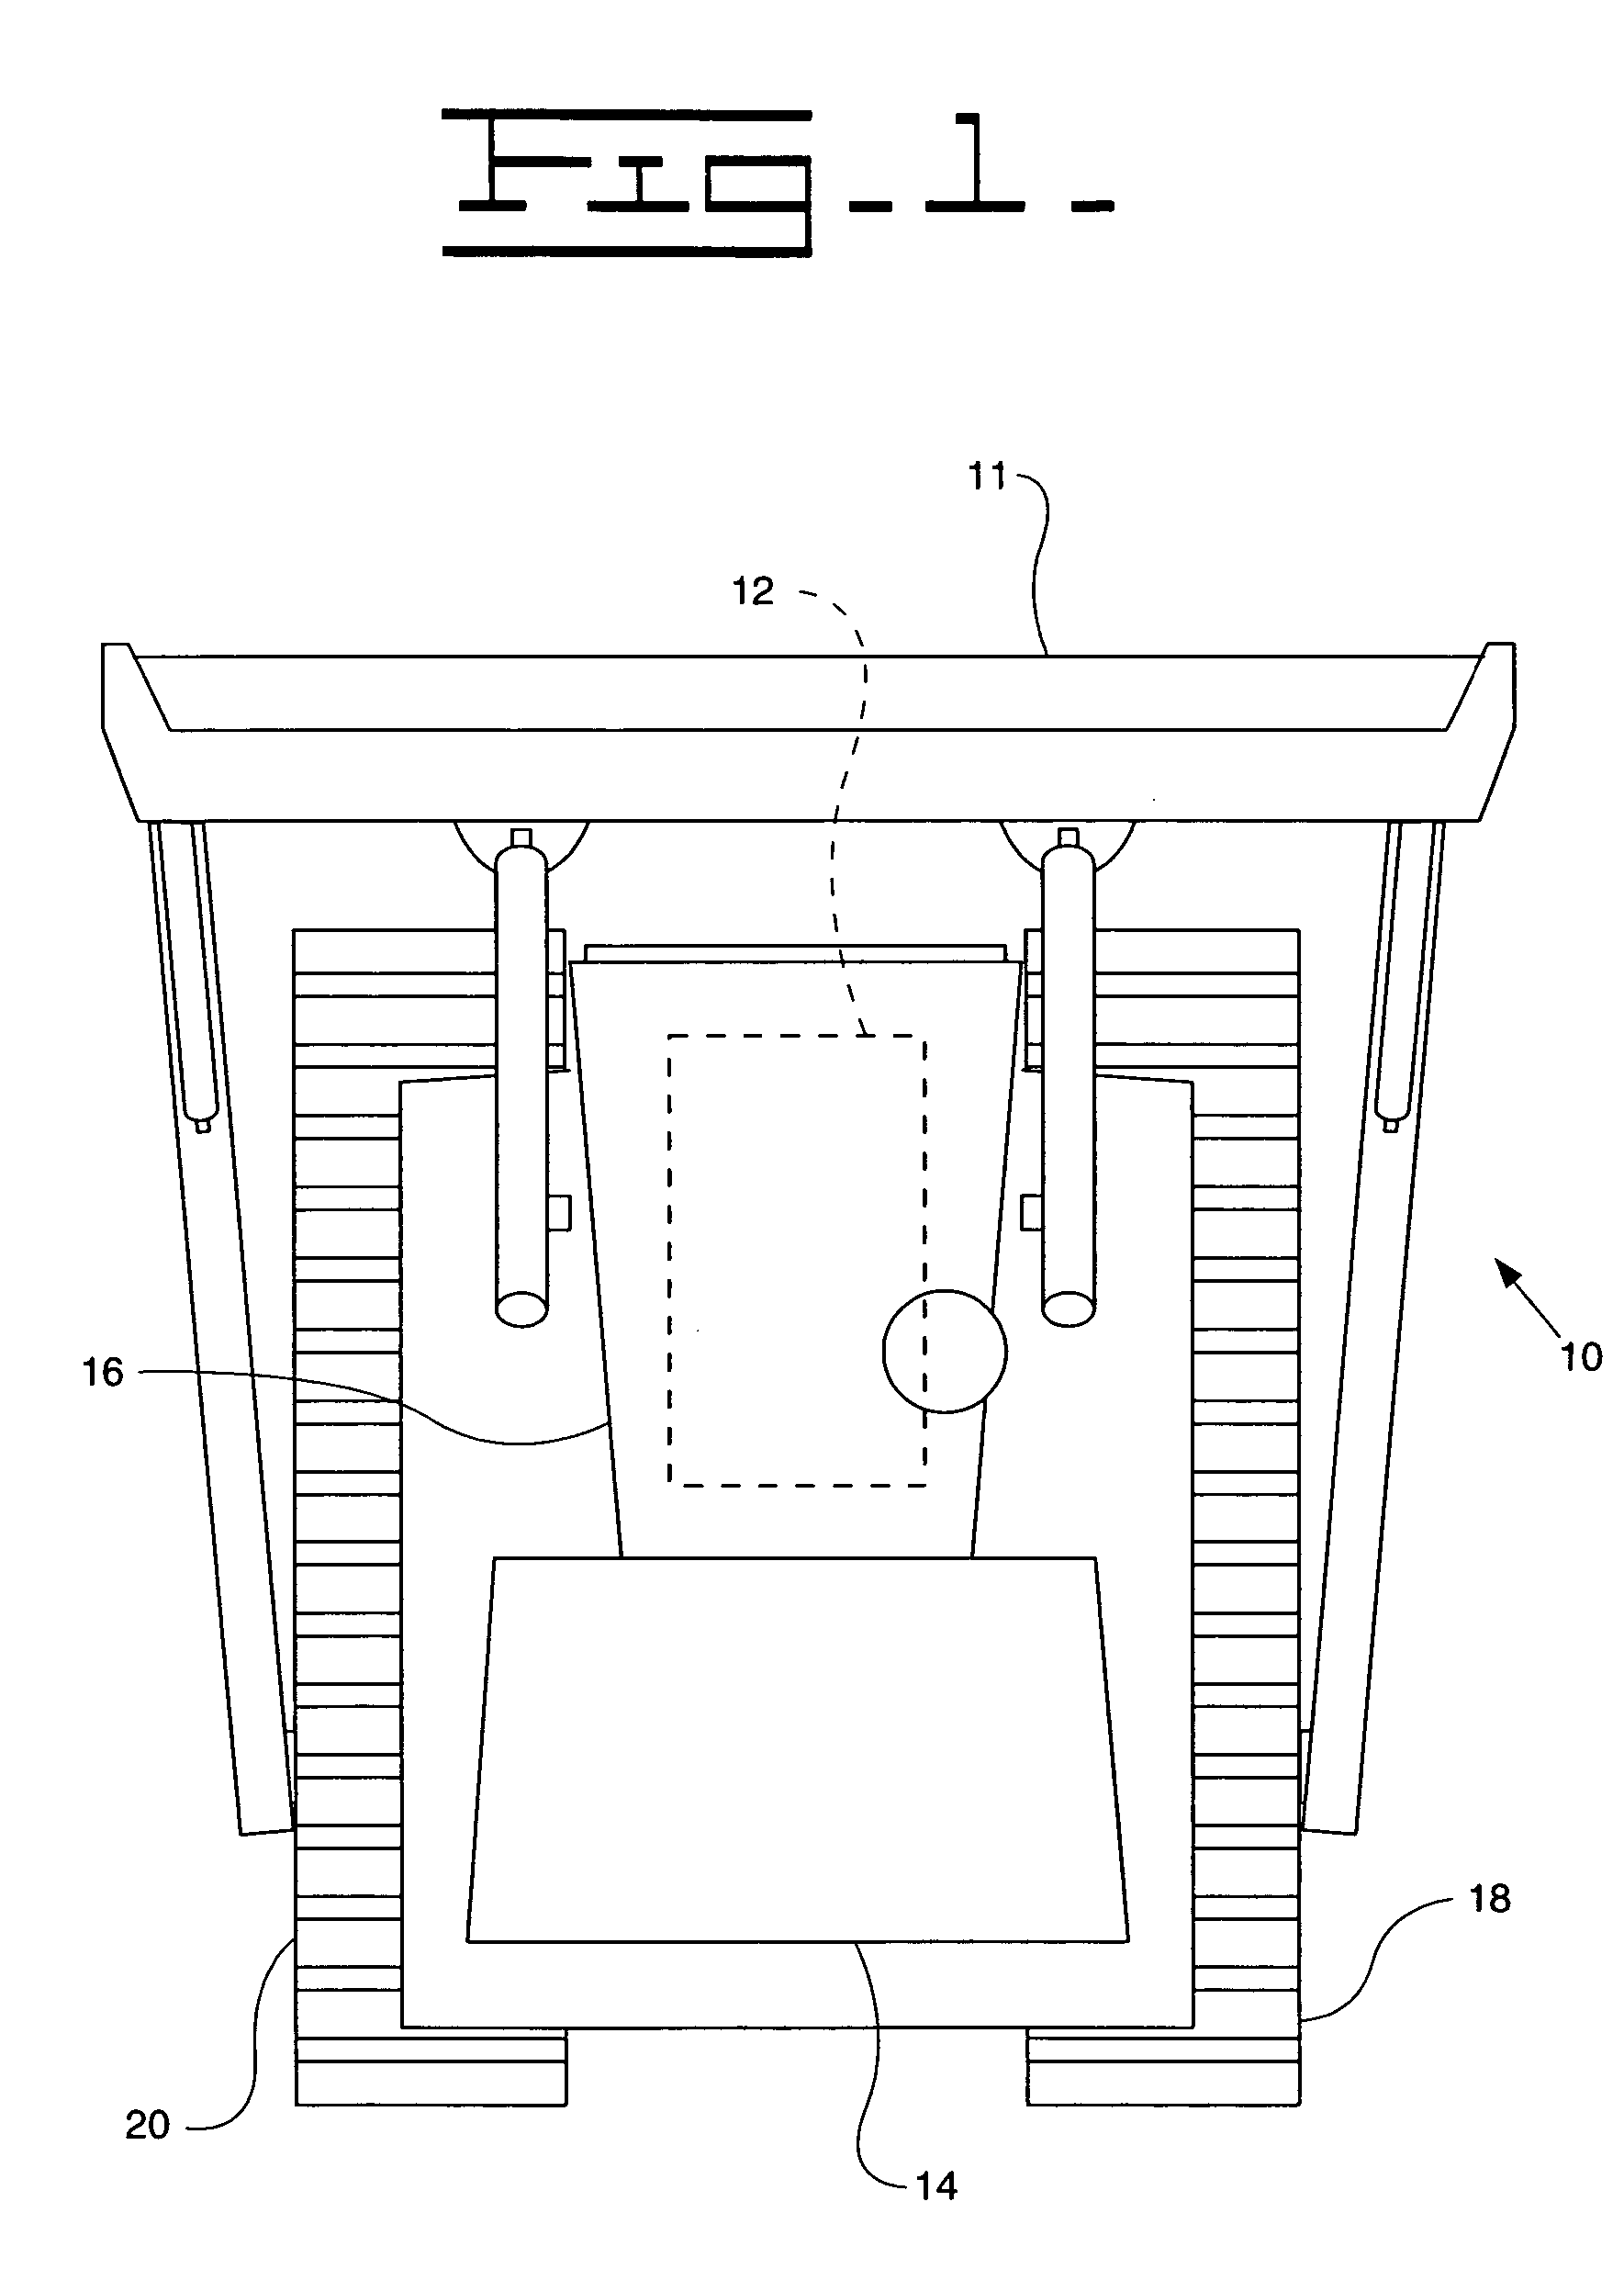 Apparatus and method to reduce vibrations on a tracked work machine